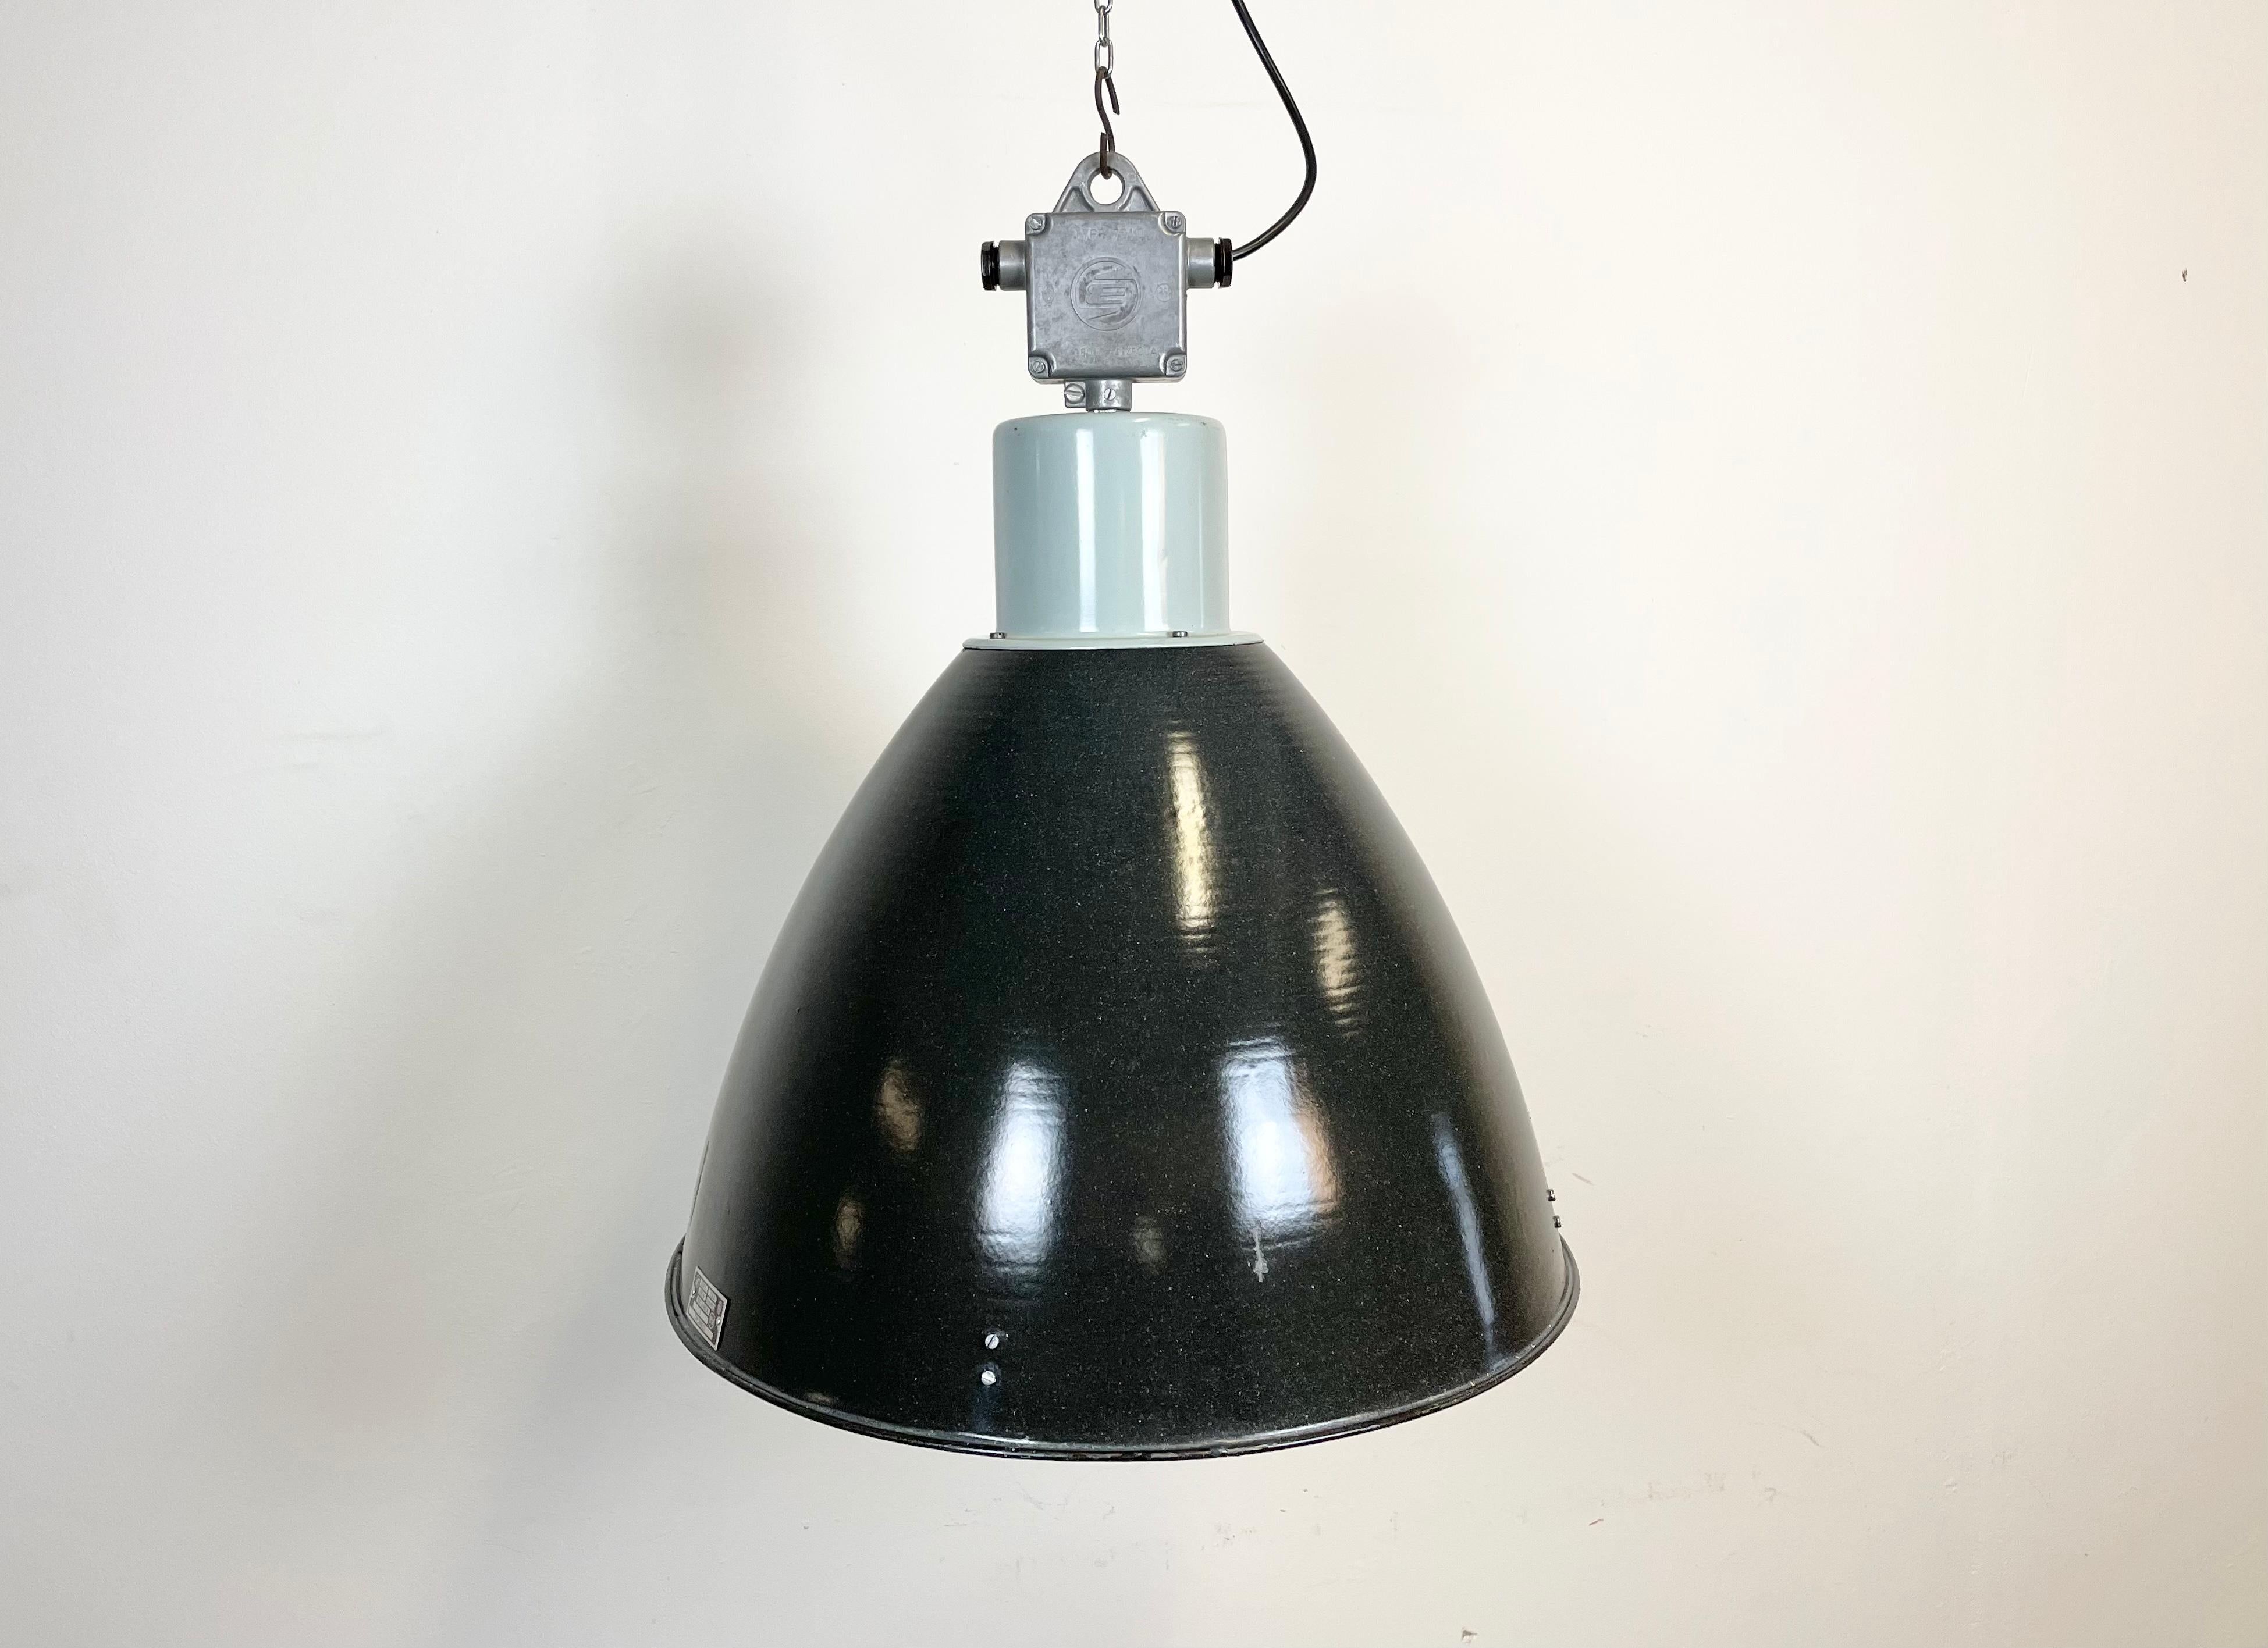 Industrial enamel pendant lamp designed and produced by Elektrosvit in former Czechoslovakia during the 1960s. It features a grey metal top with cast aluminium box and black ( dark grey ) enamel shade with white enamel interior.
New porcelain